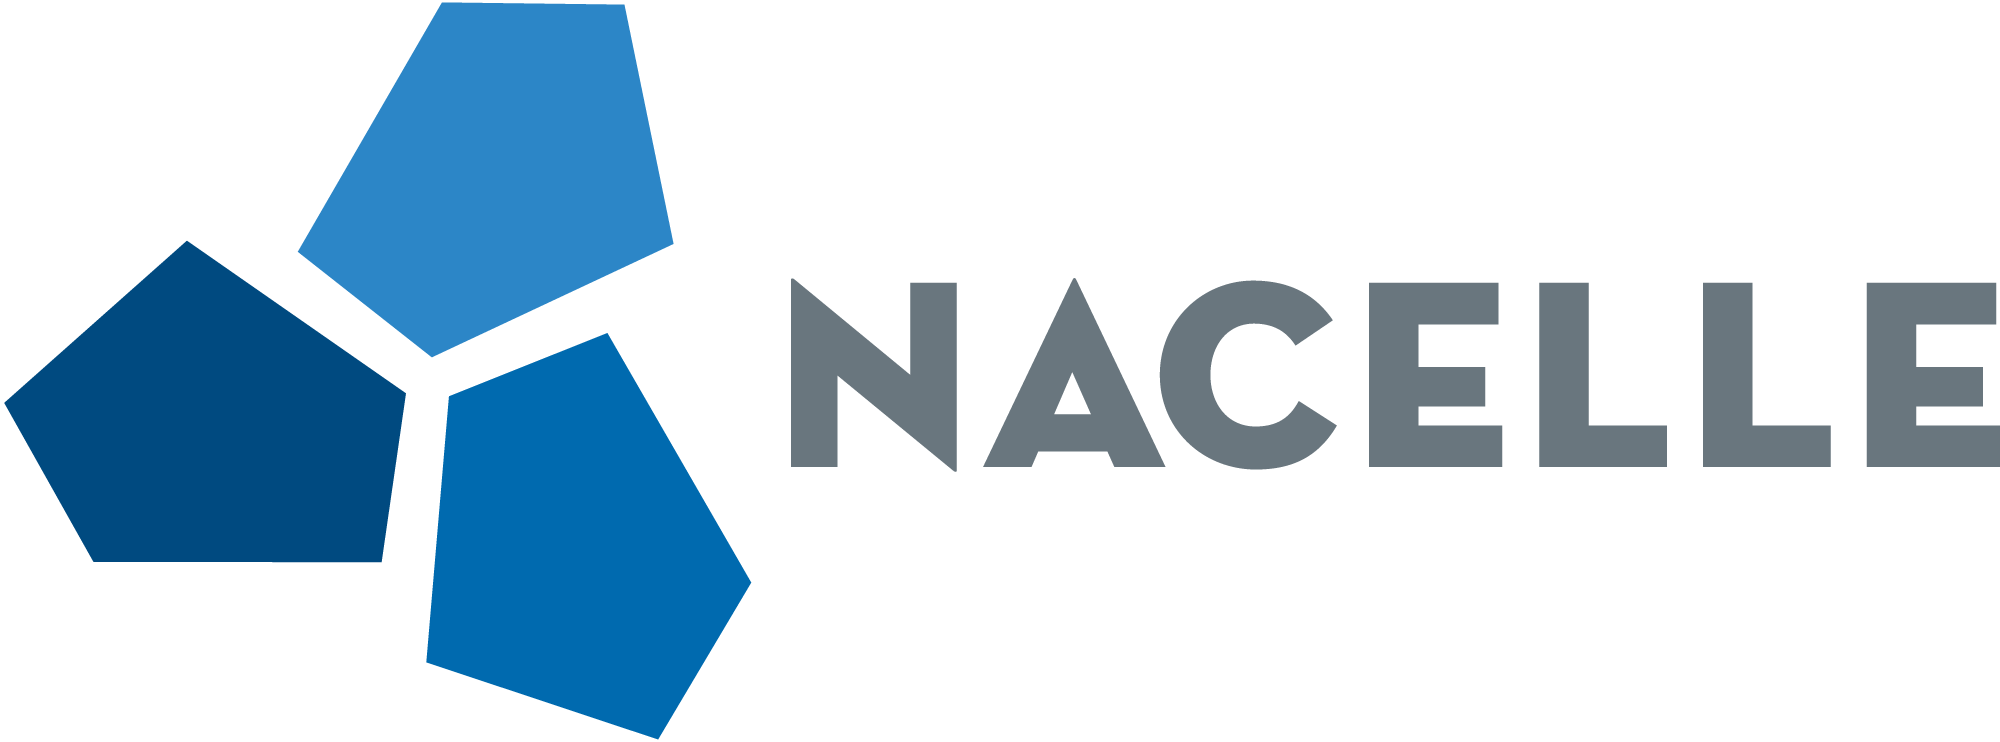 Nacelle, PLLC - Renewable Energy Real Estate Lawyers